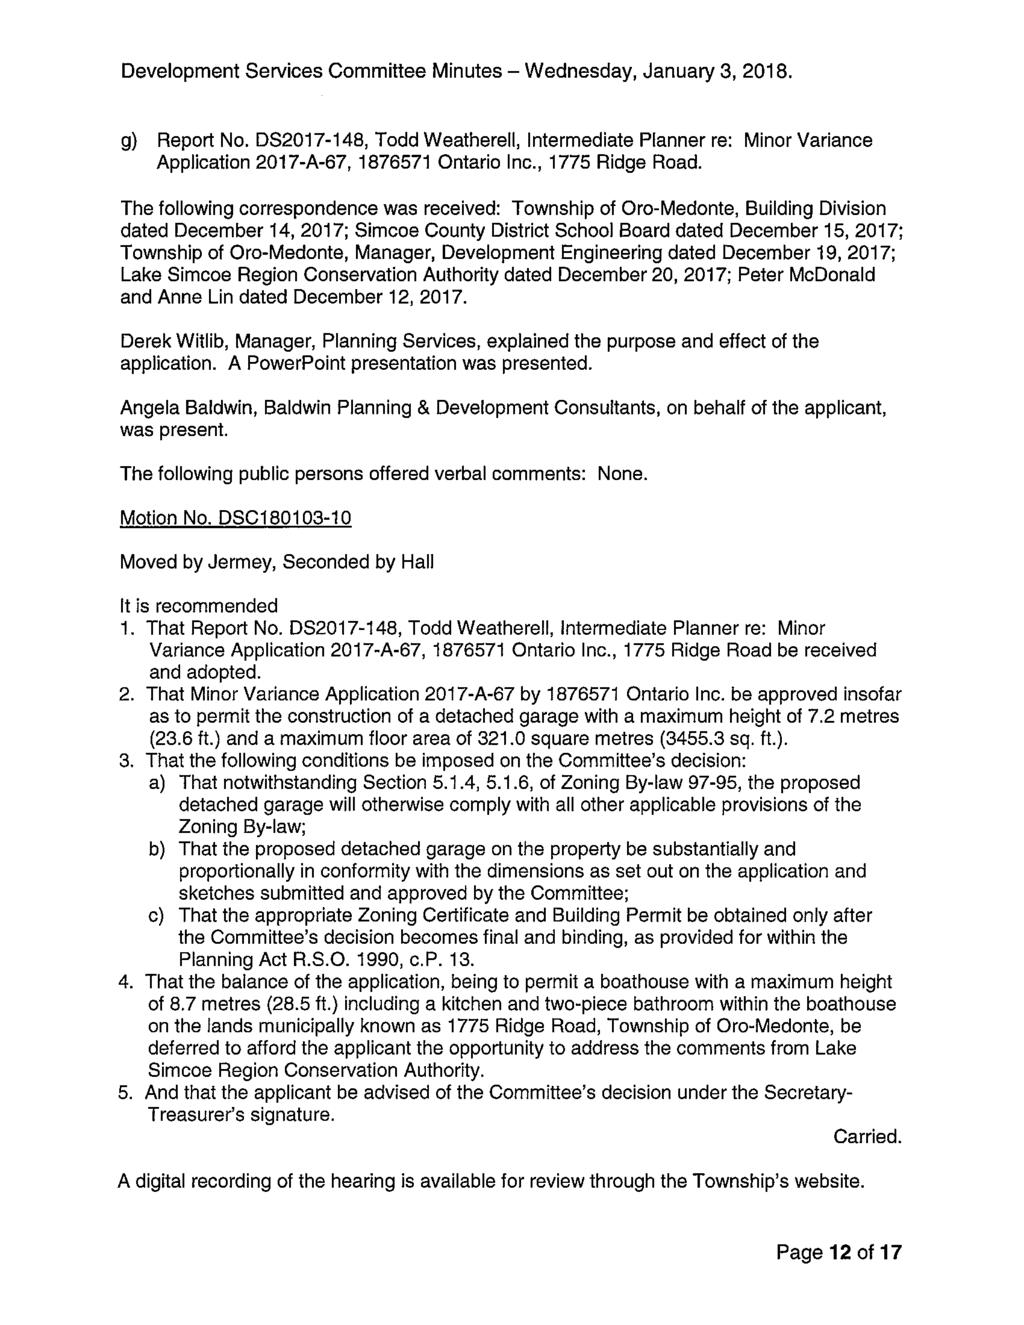 g) Report No. DS2017-148, Todd Weatherell, Intermediate Planner re: Minor Variance Application 2017-A-67, 1876571 Ontario Inc., 1775 Ridge Road.